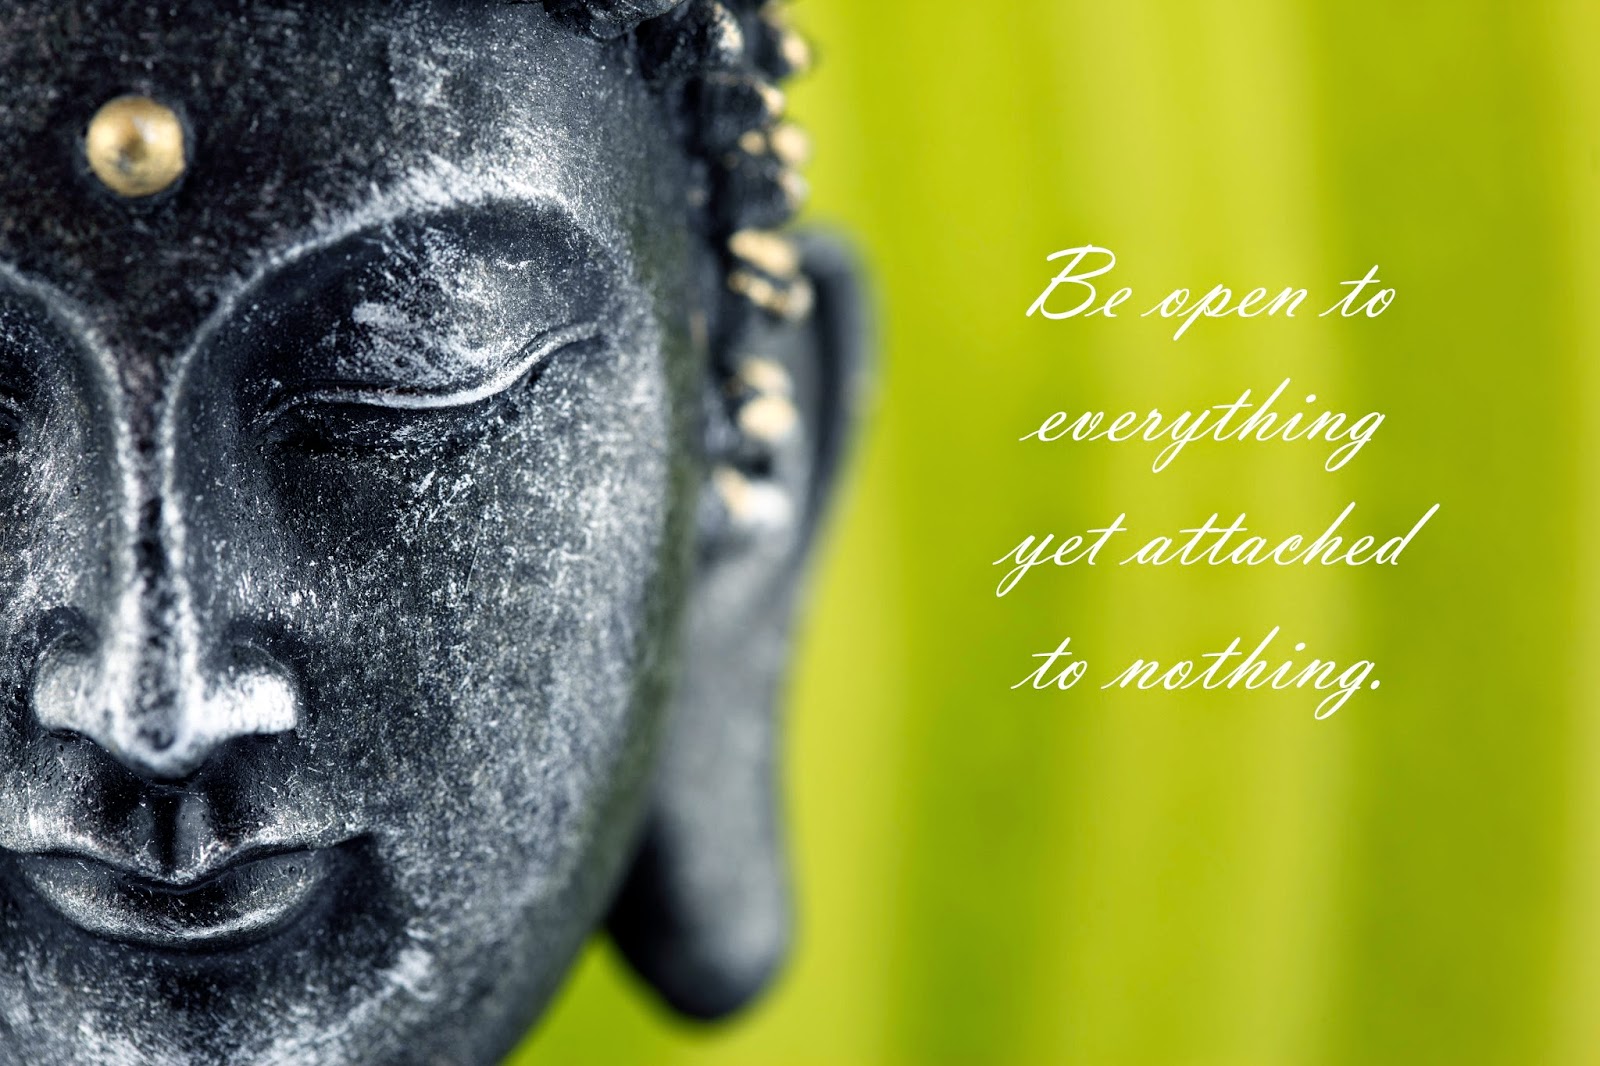 New Buddha Best Quotes Wallpaper For Desktop Mobile